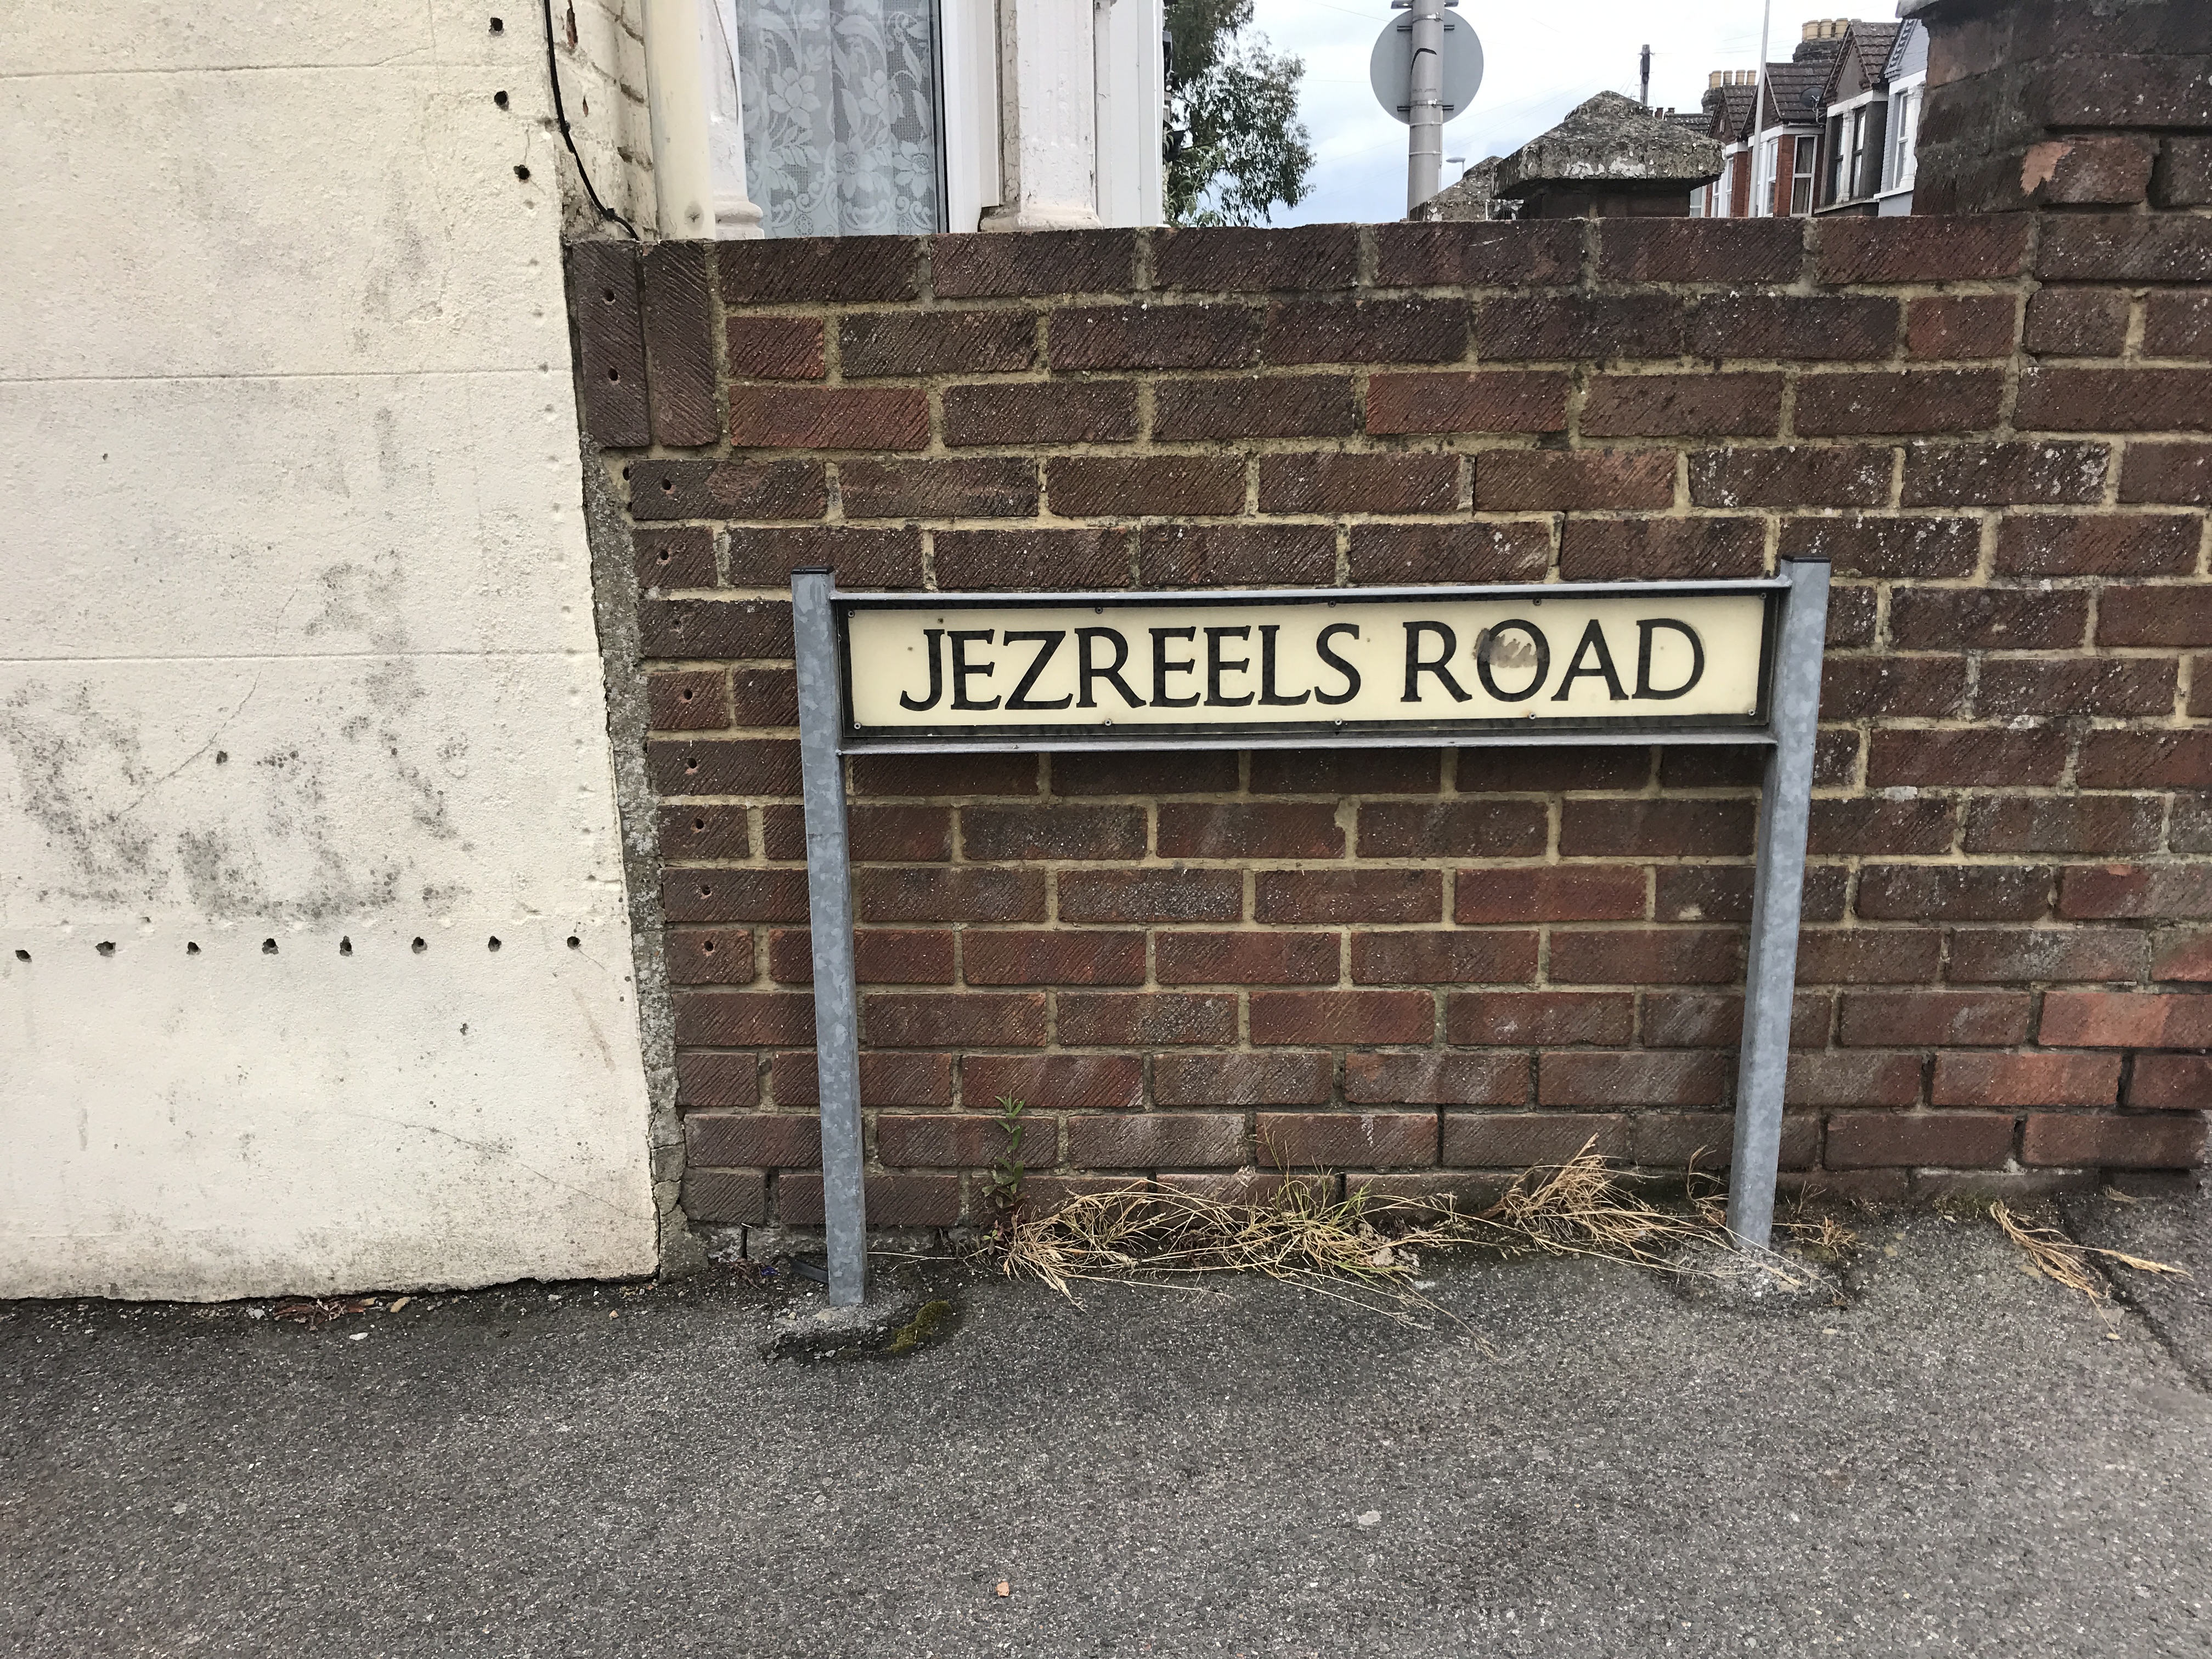 A photograph of the road sign for Jezreel's Road, Gillingham